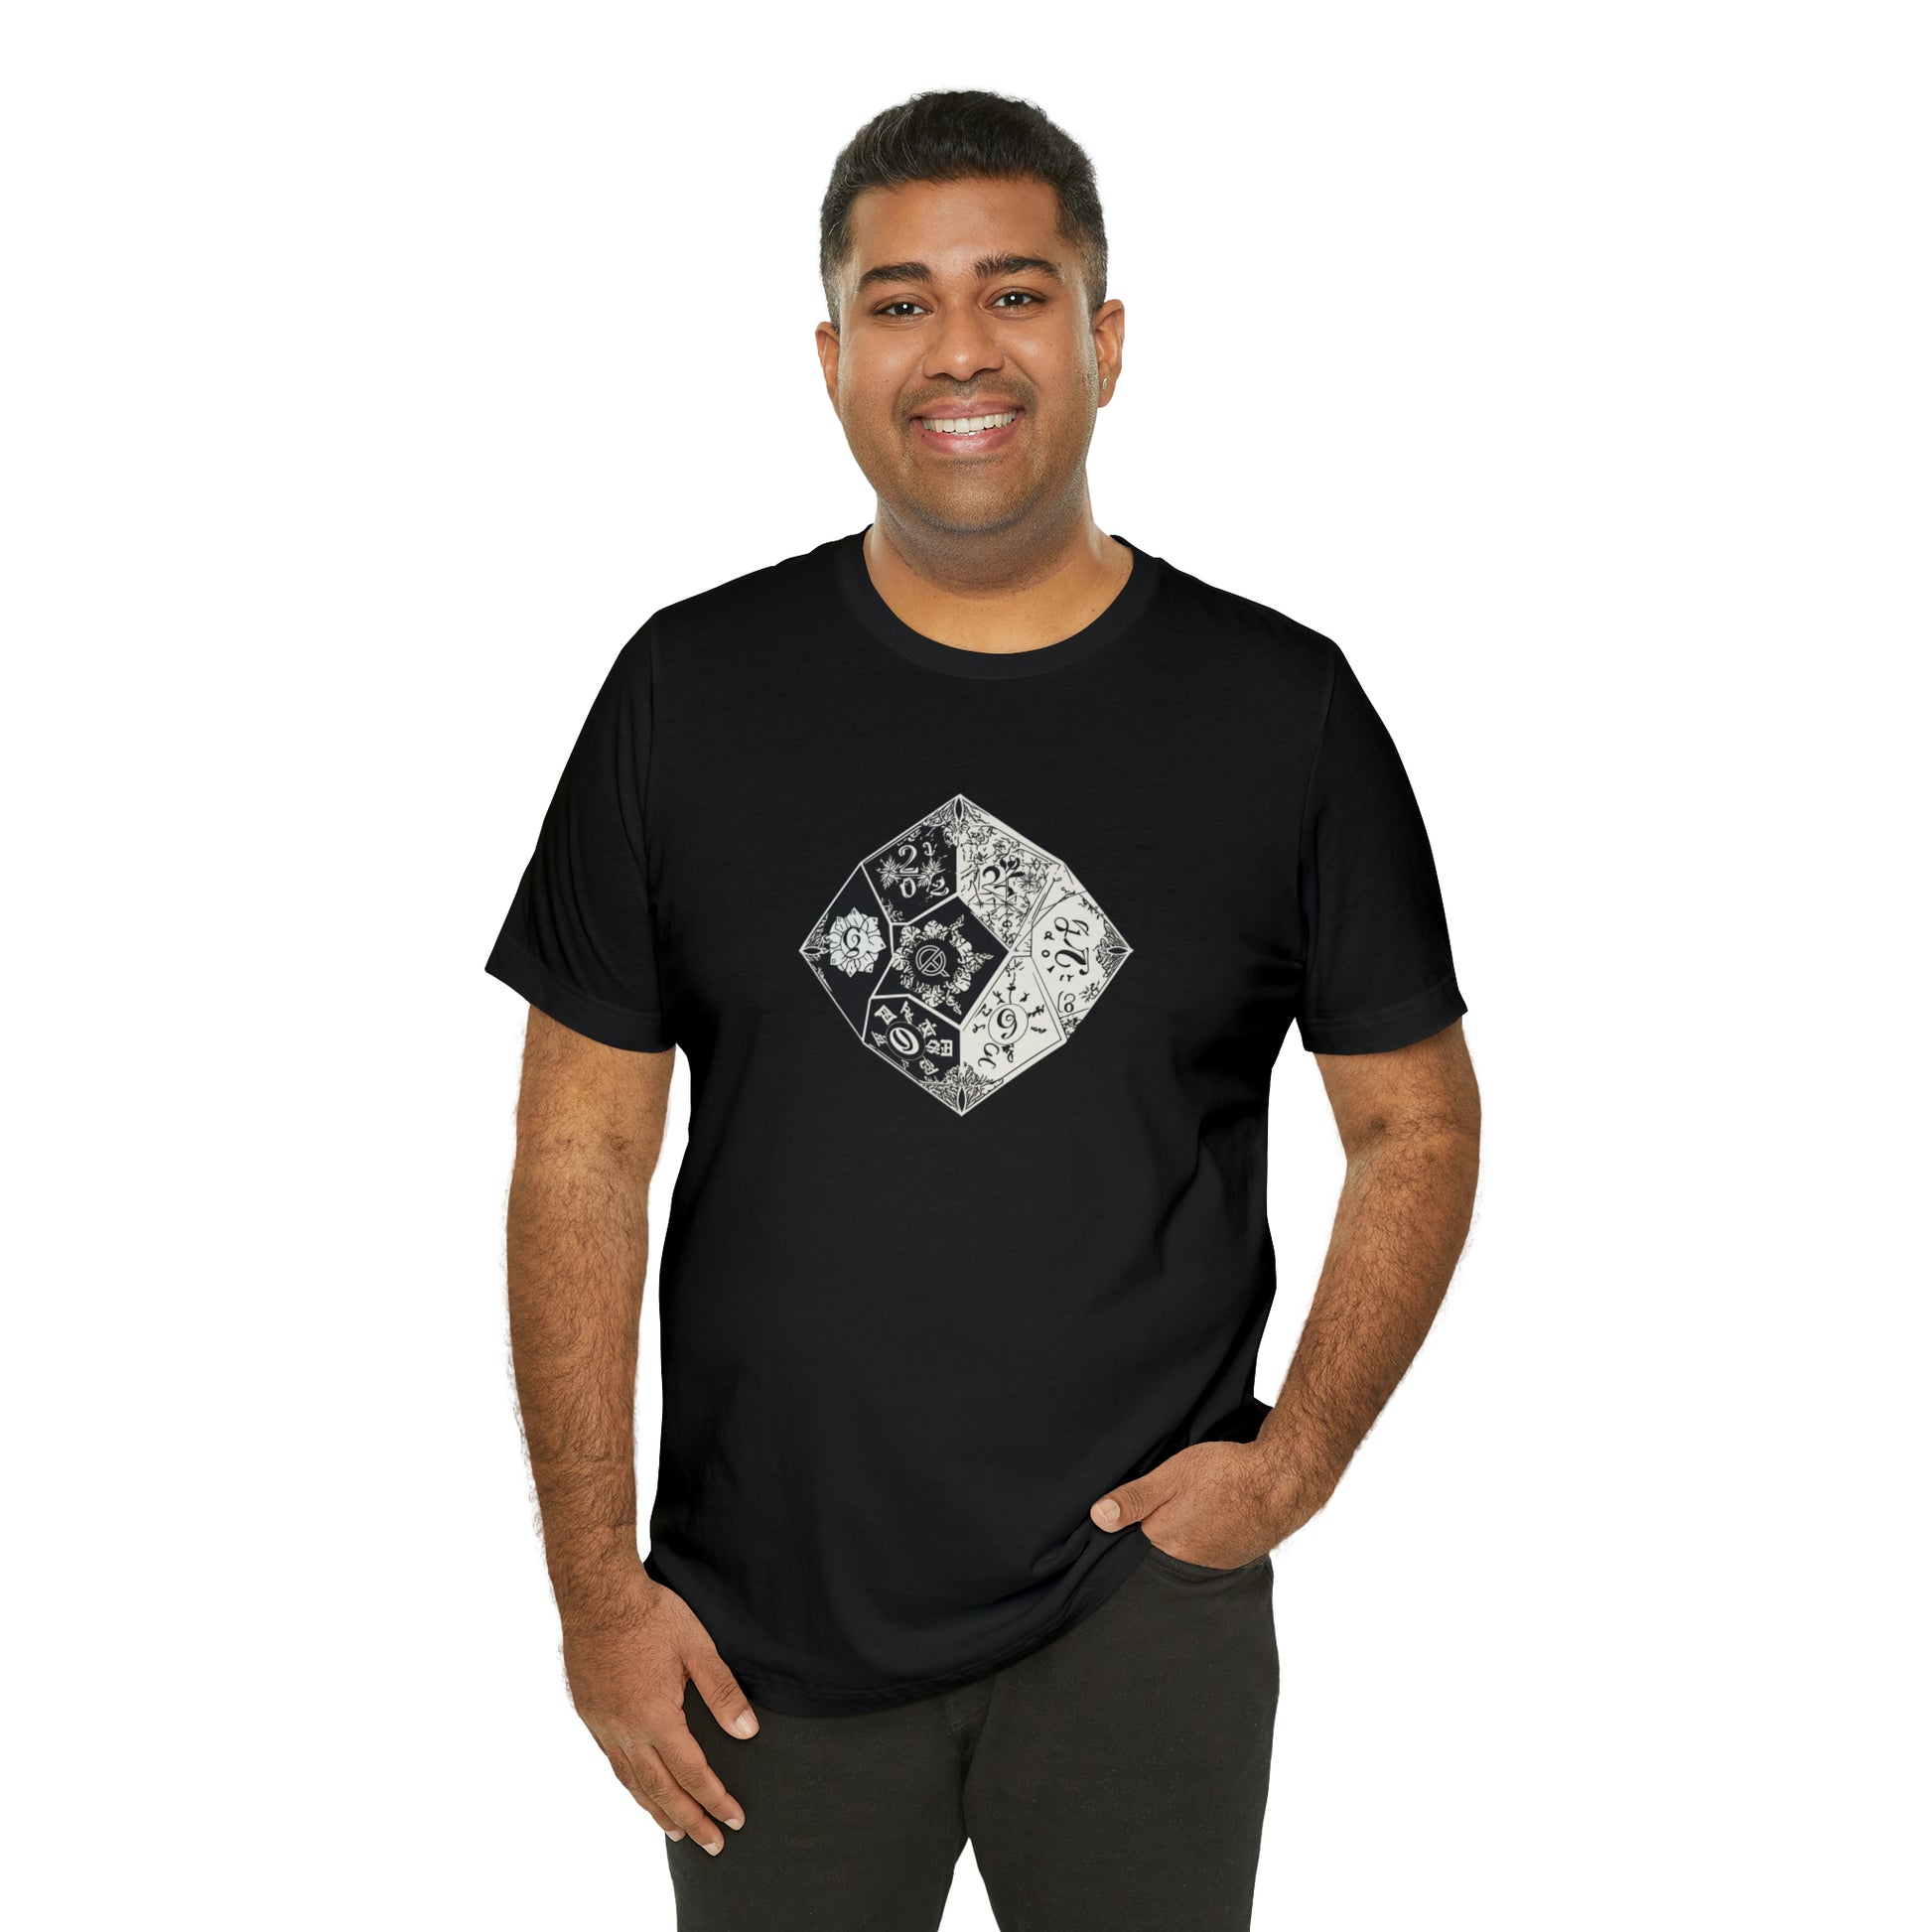 black-quest-thread-tee-shirt-with-large-black-and-white-artistic-dice-on-center